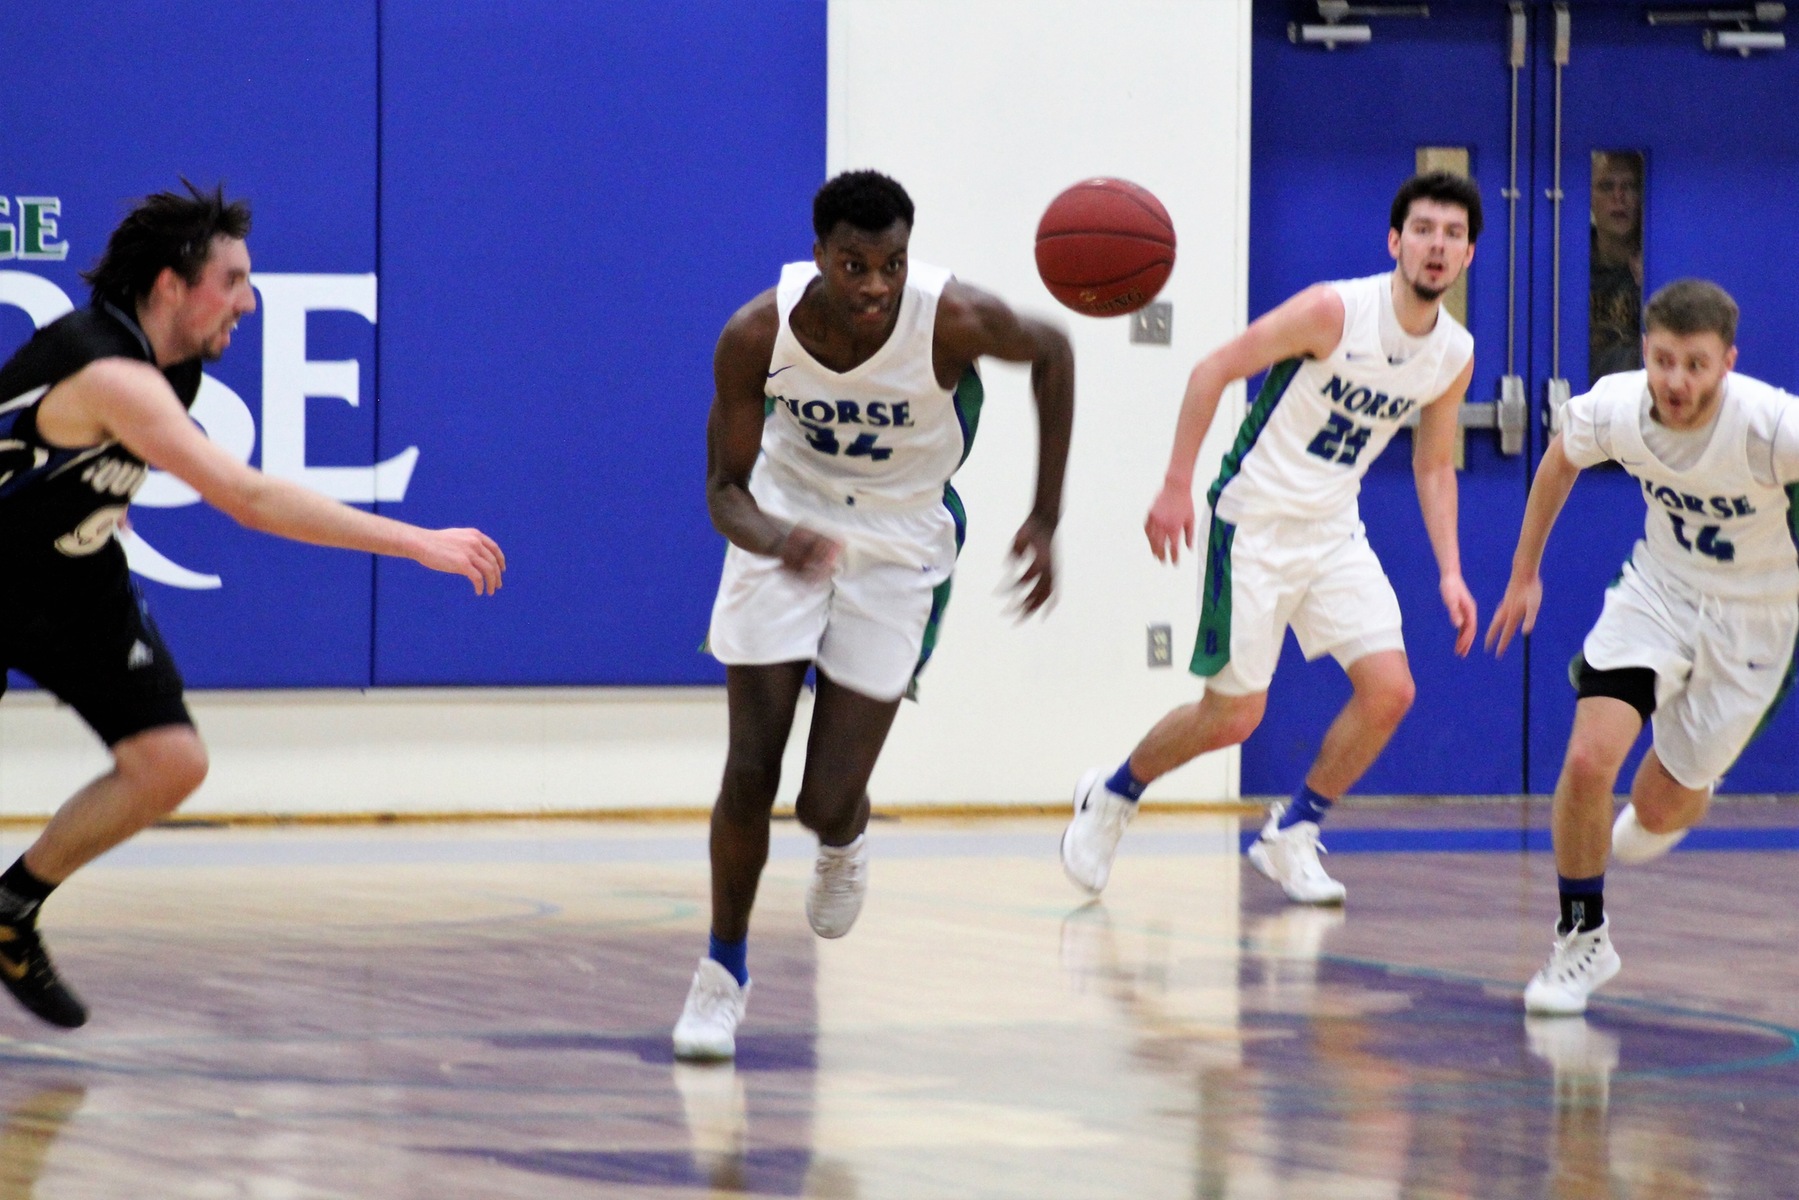 Kobi Barnes chasing a loose ball, Garret Finkbeiner and Dre Touminen look on in the background